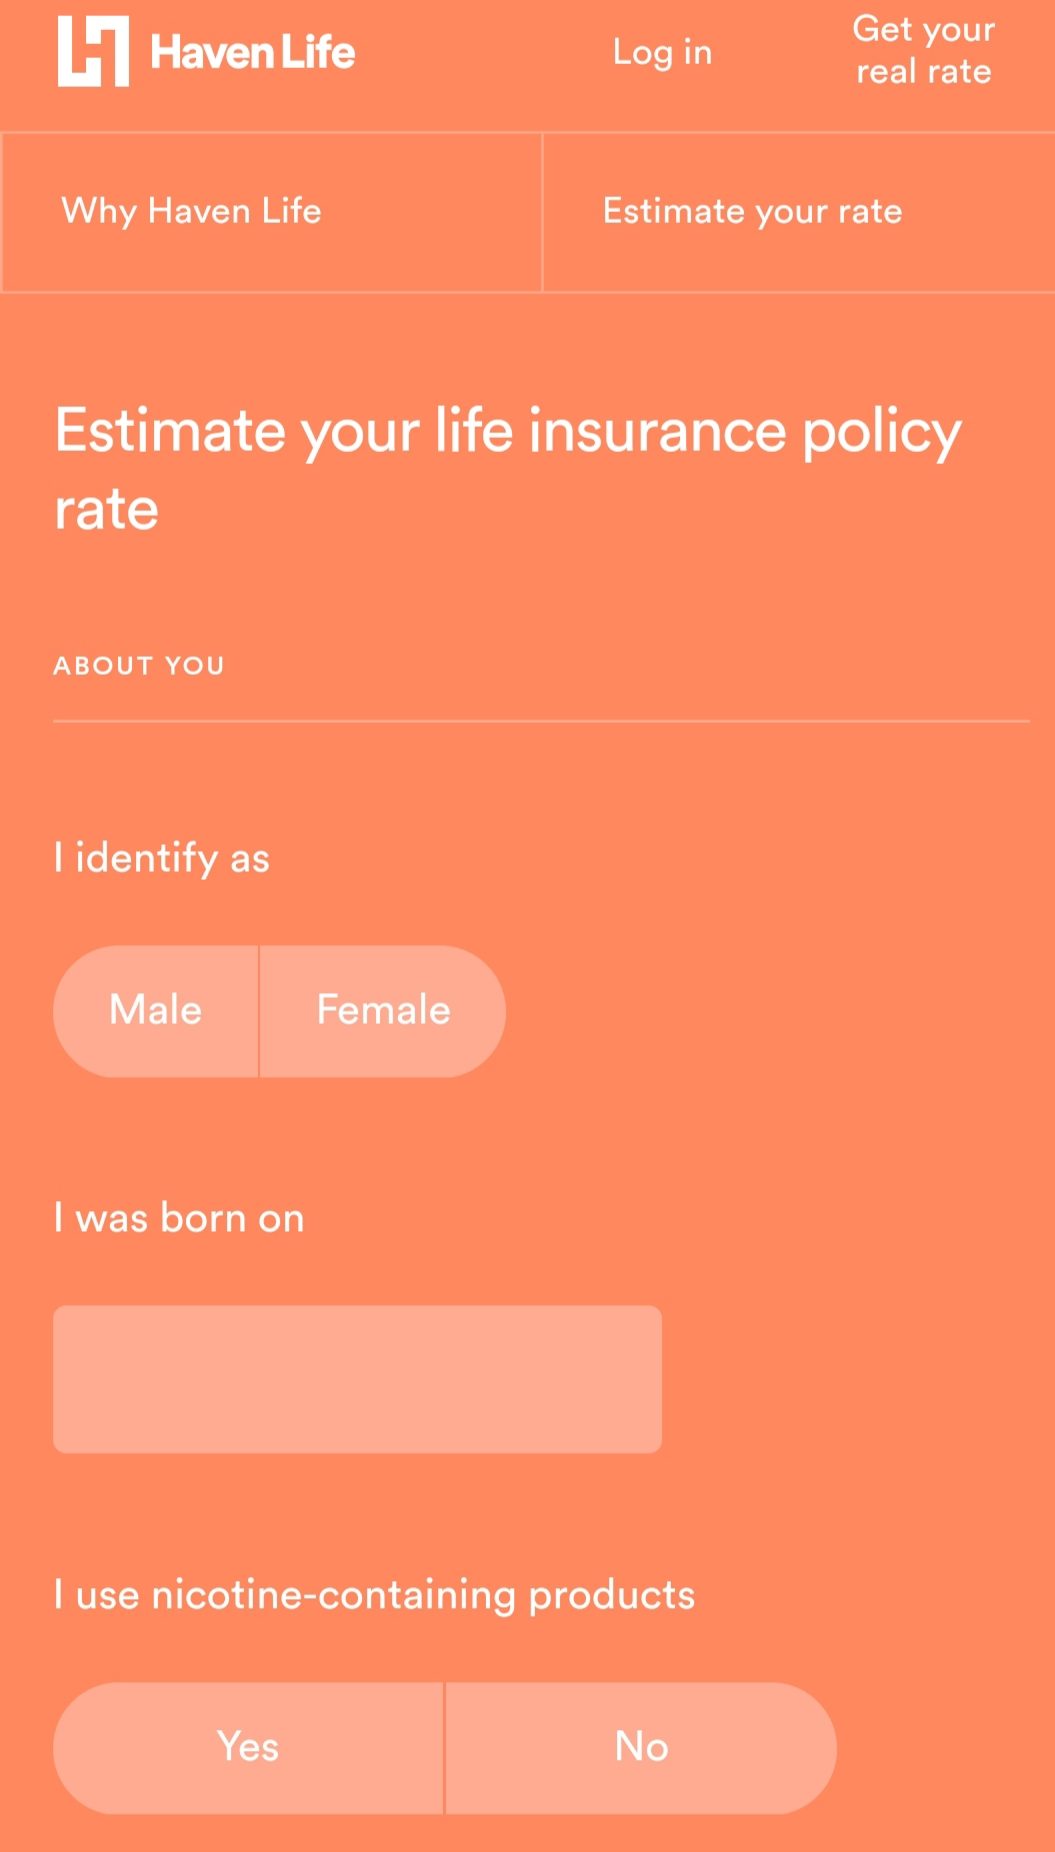 Haven Life mobile quote tool